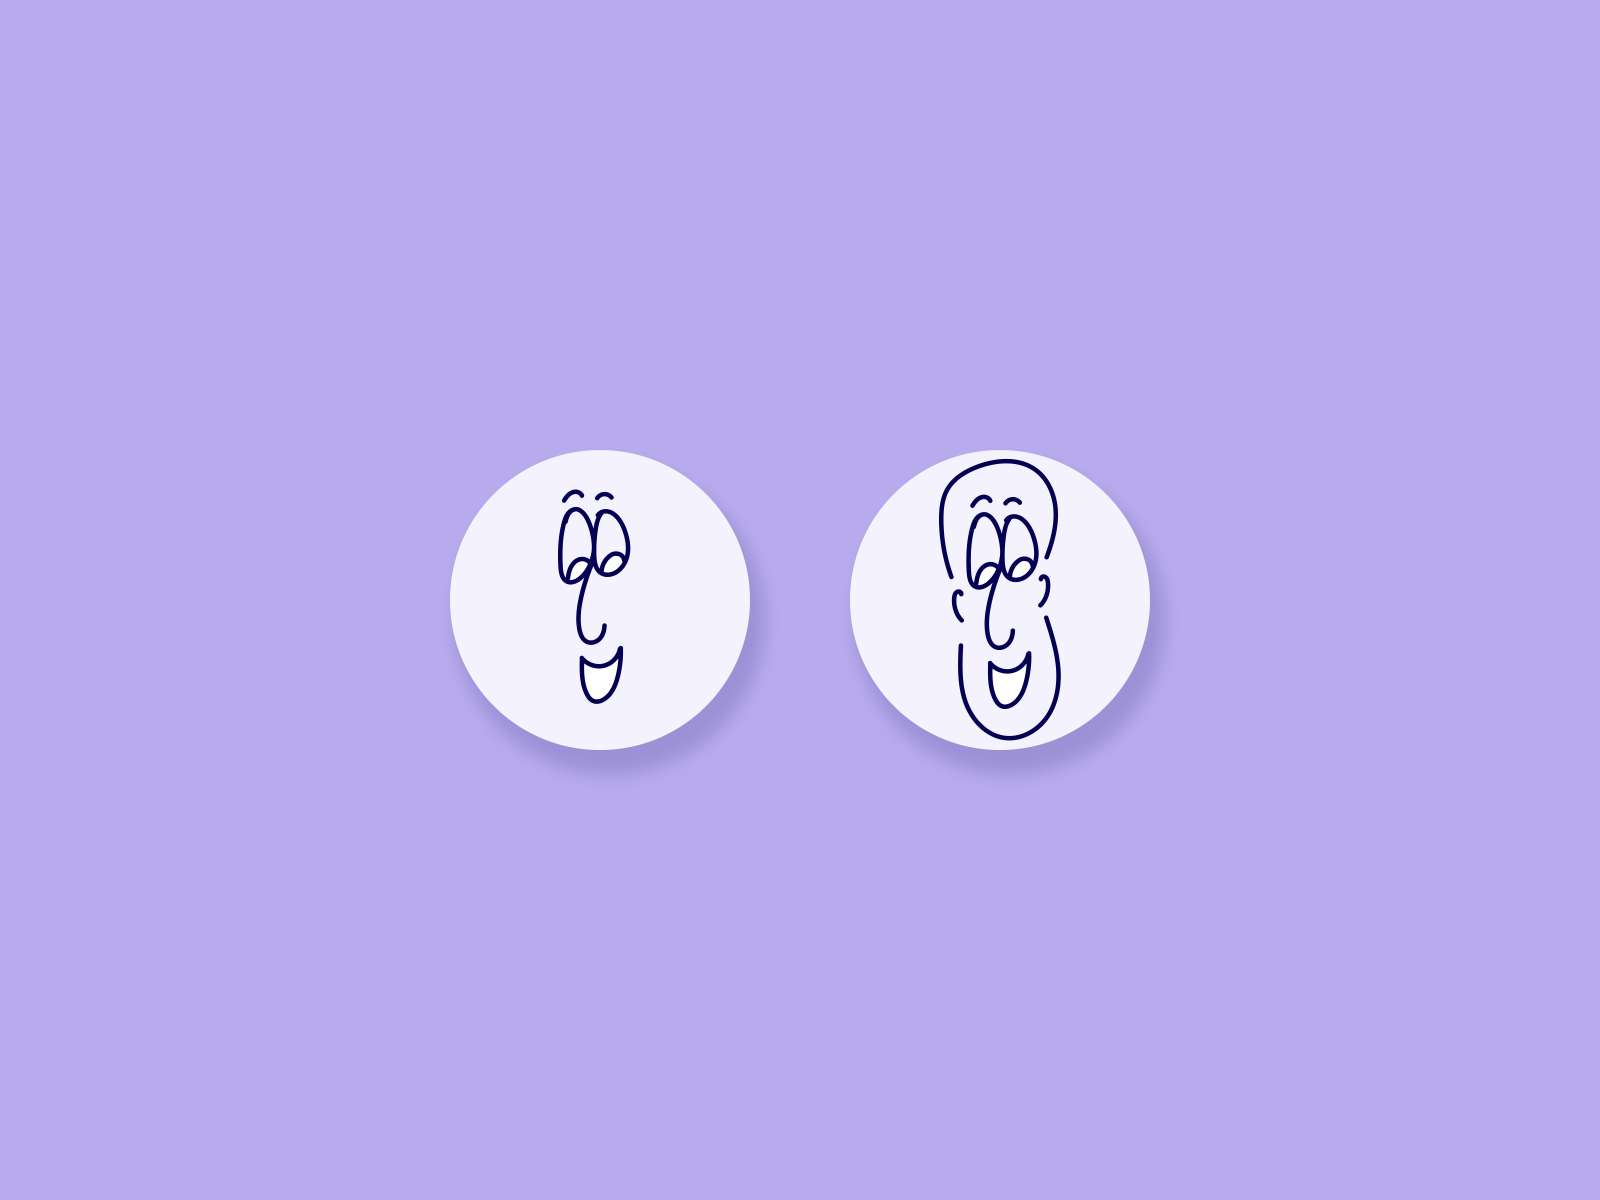 Avatar by Helen Arvanitopoulos on Dribbble